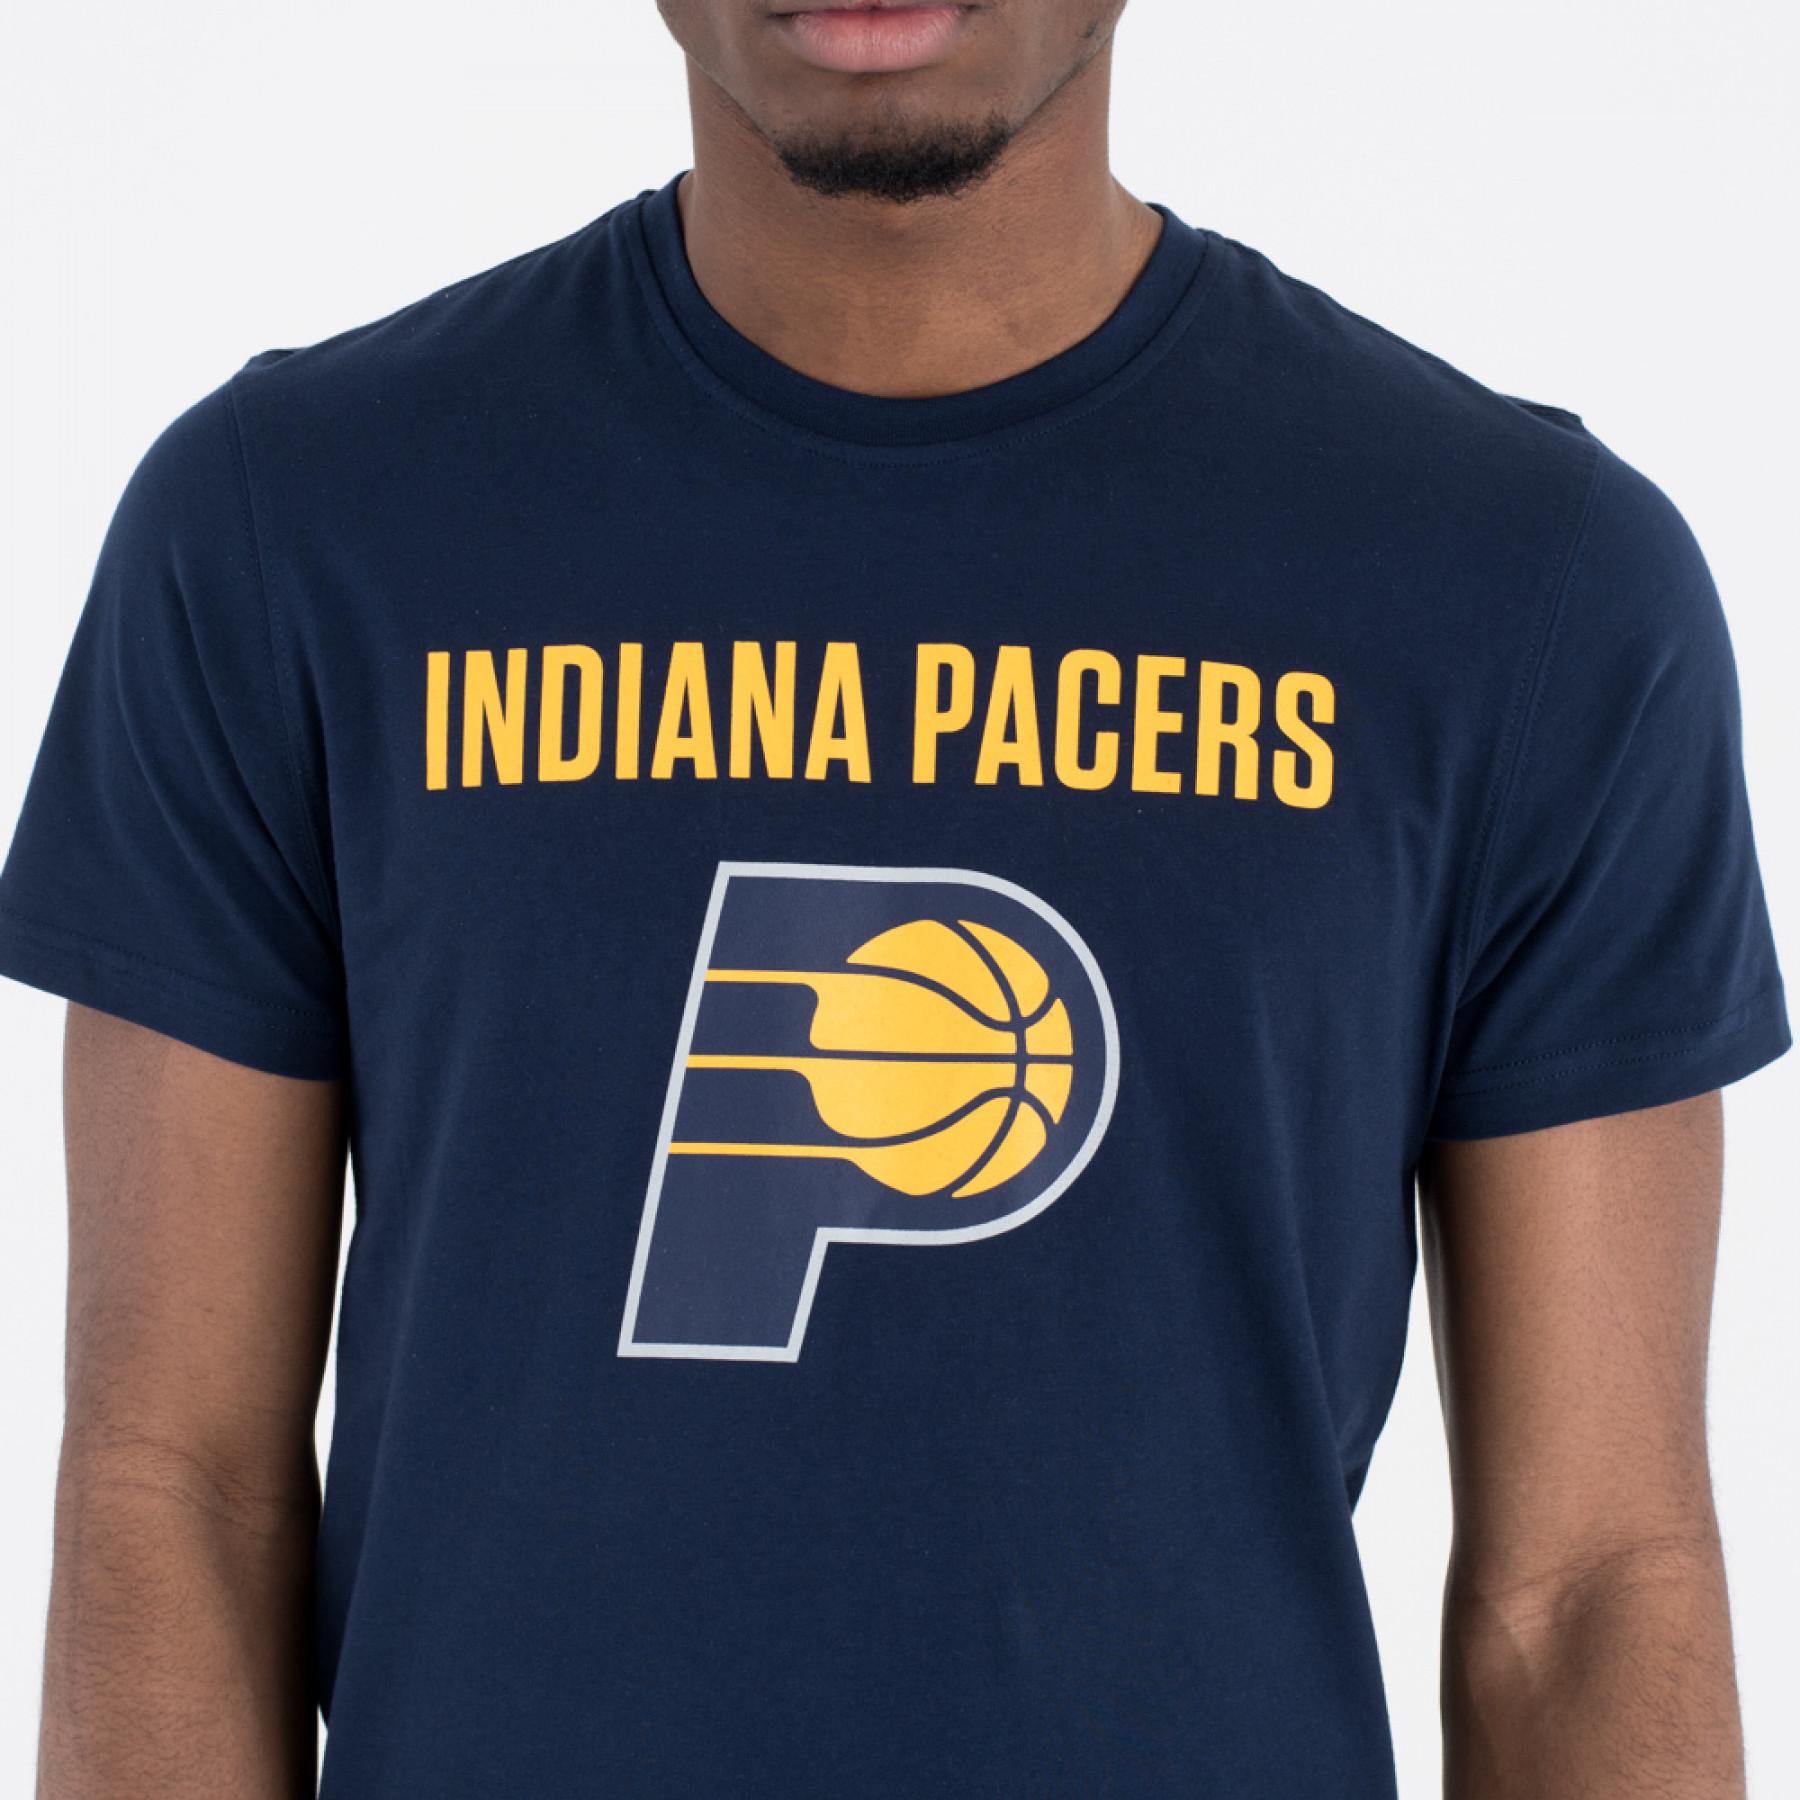  New EraT - s h i r t   logo Indiana Pacers